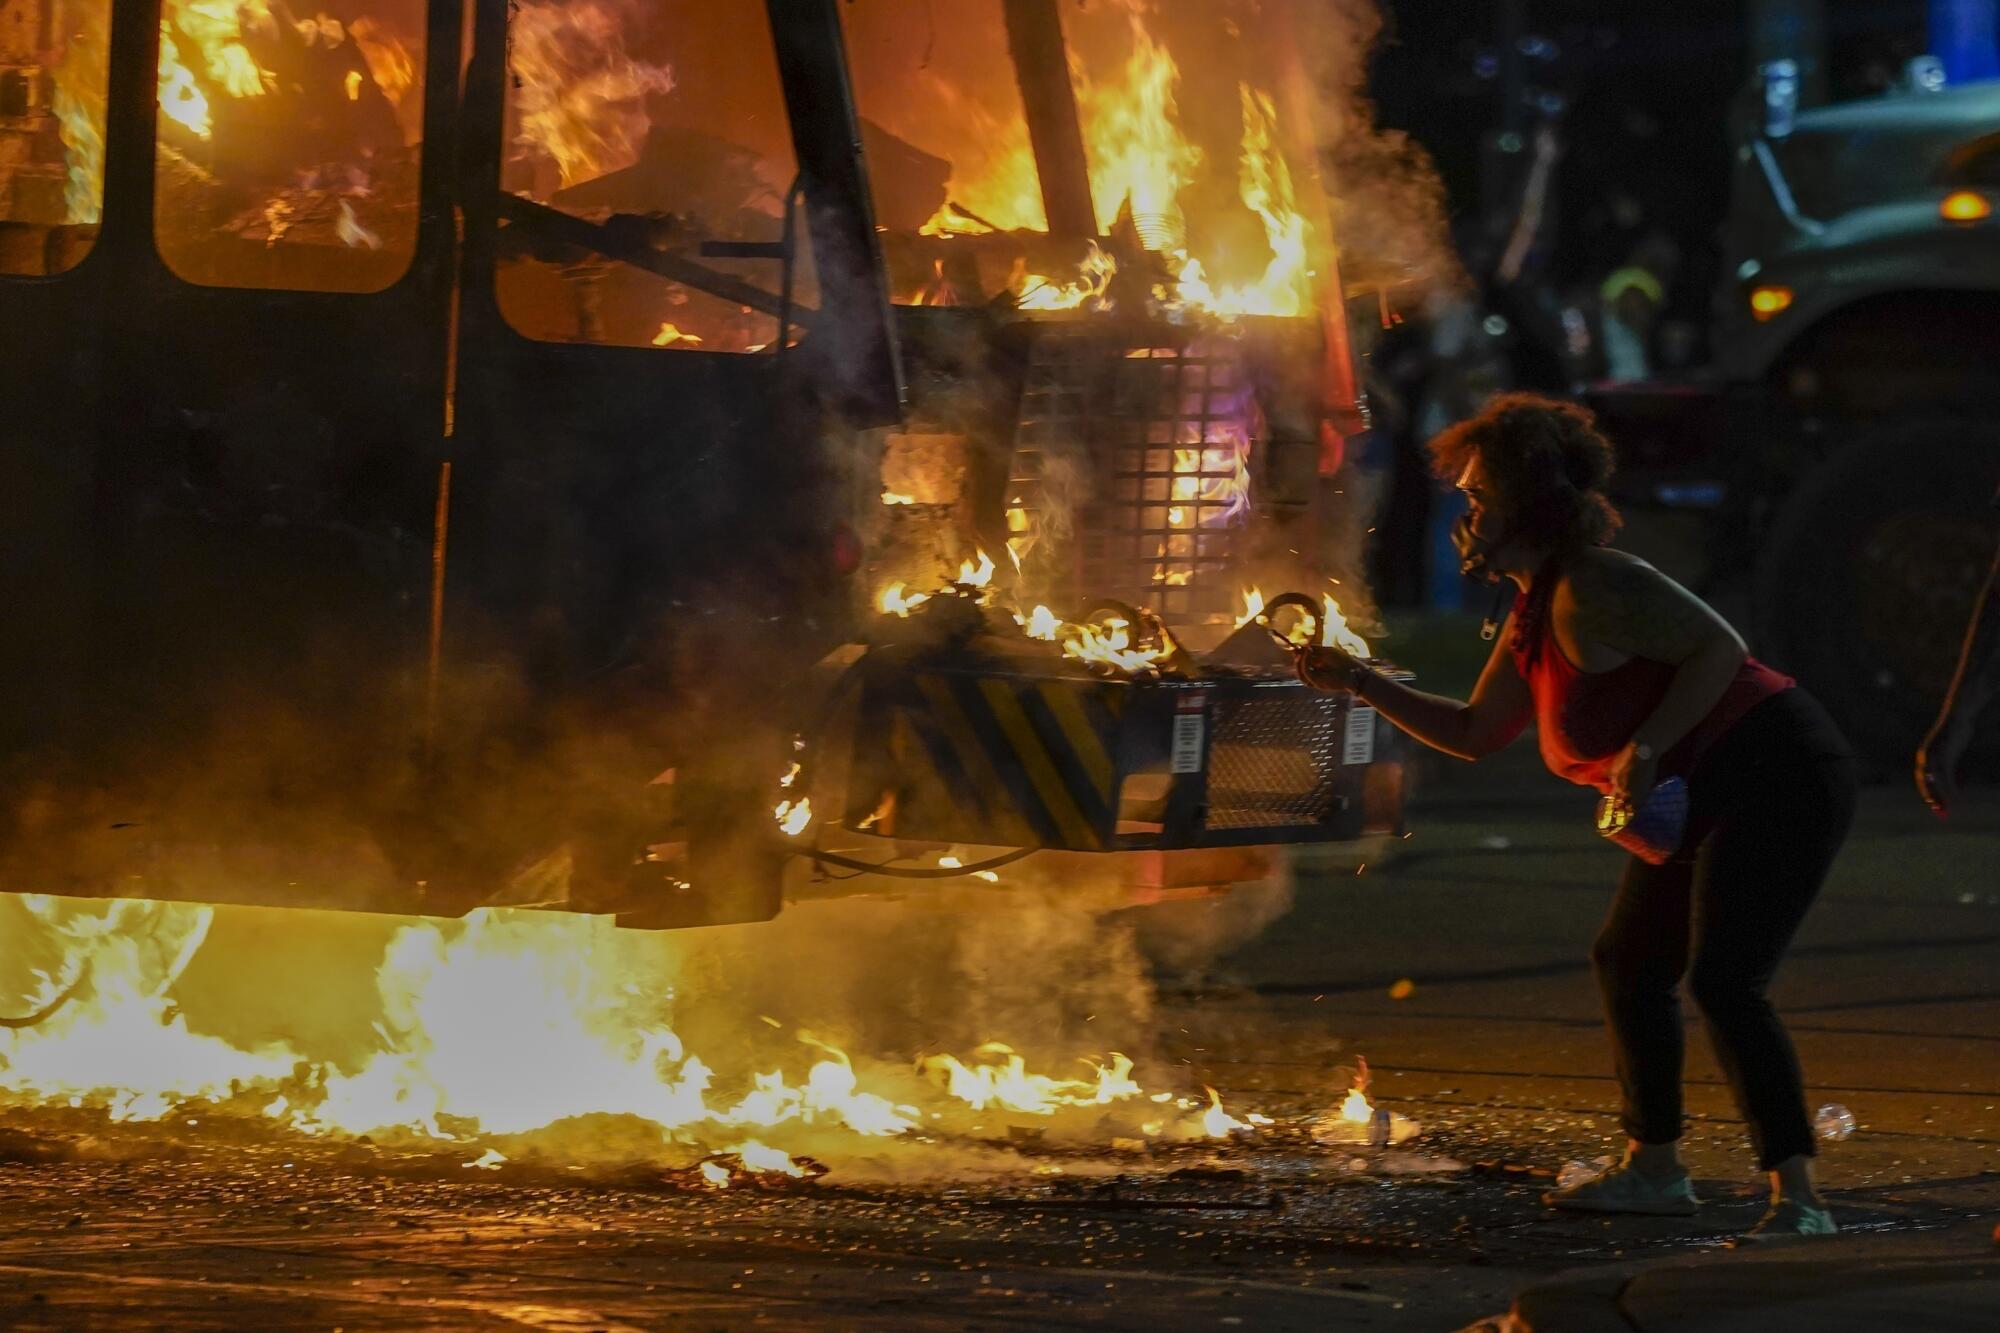 A protester lights a cigarette on a garbage truck that was set on fire.